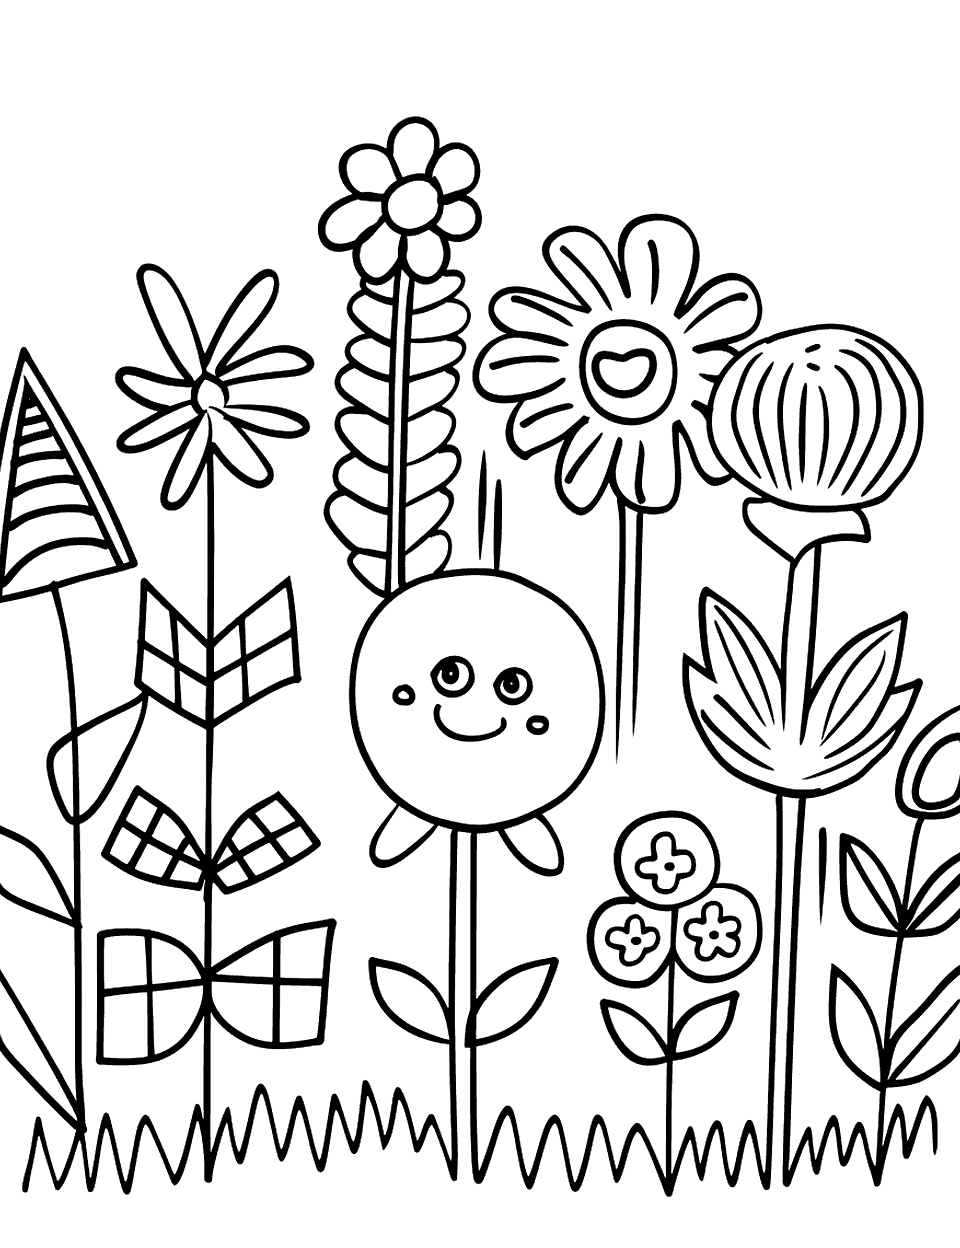 Geometric Garden Shapes Coloring Page - Flowers and trees made of shapes like rectangles, circles, and triangles.